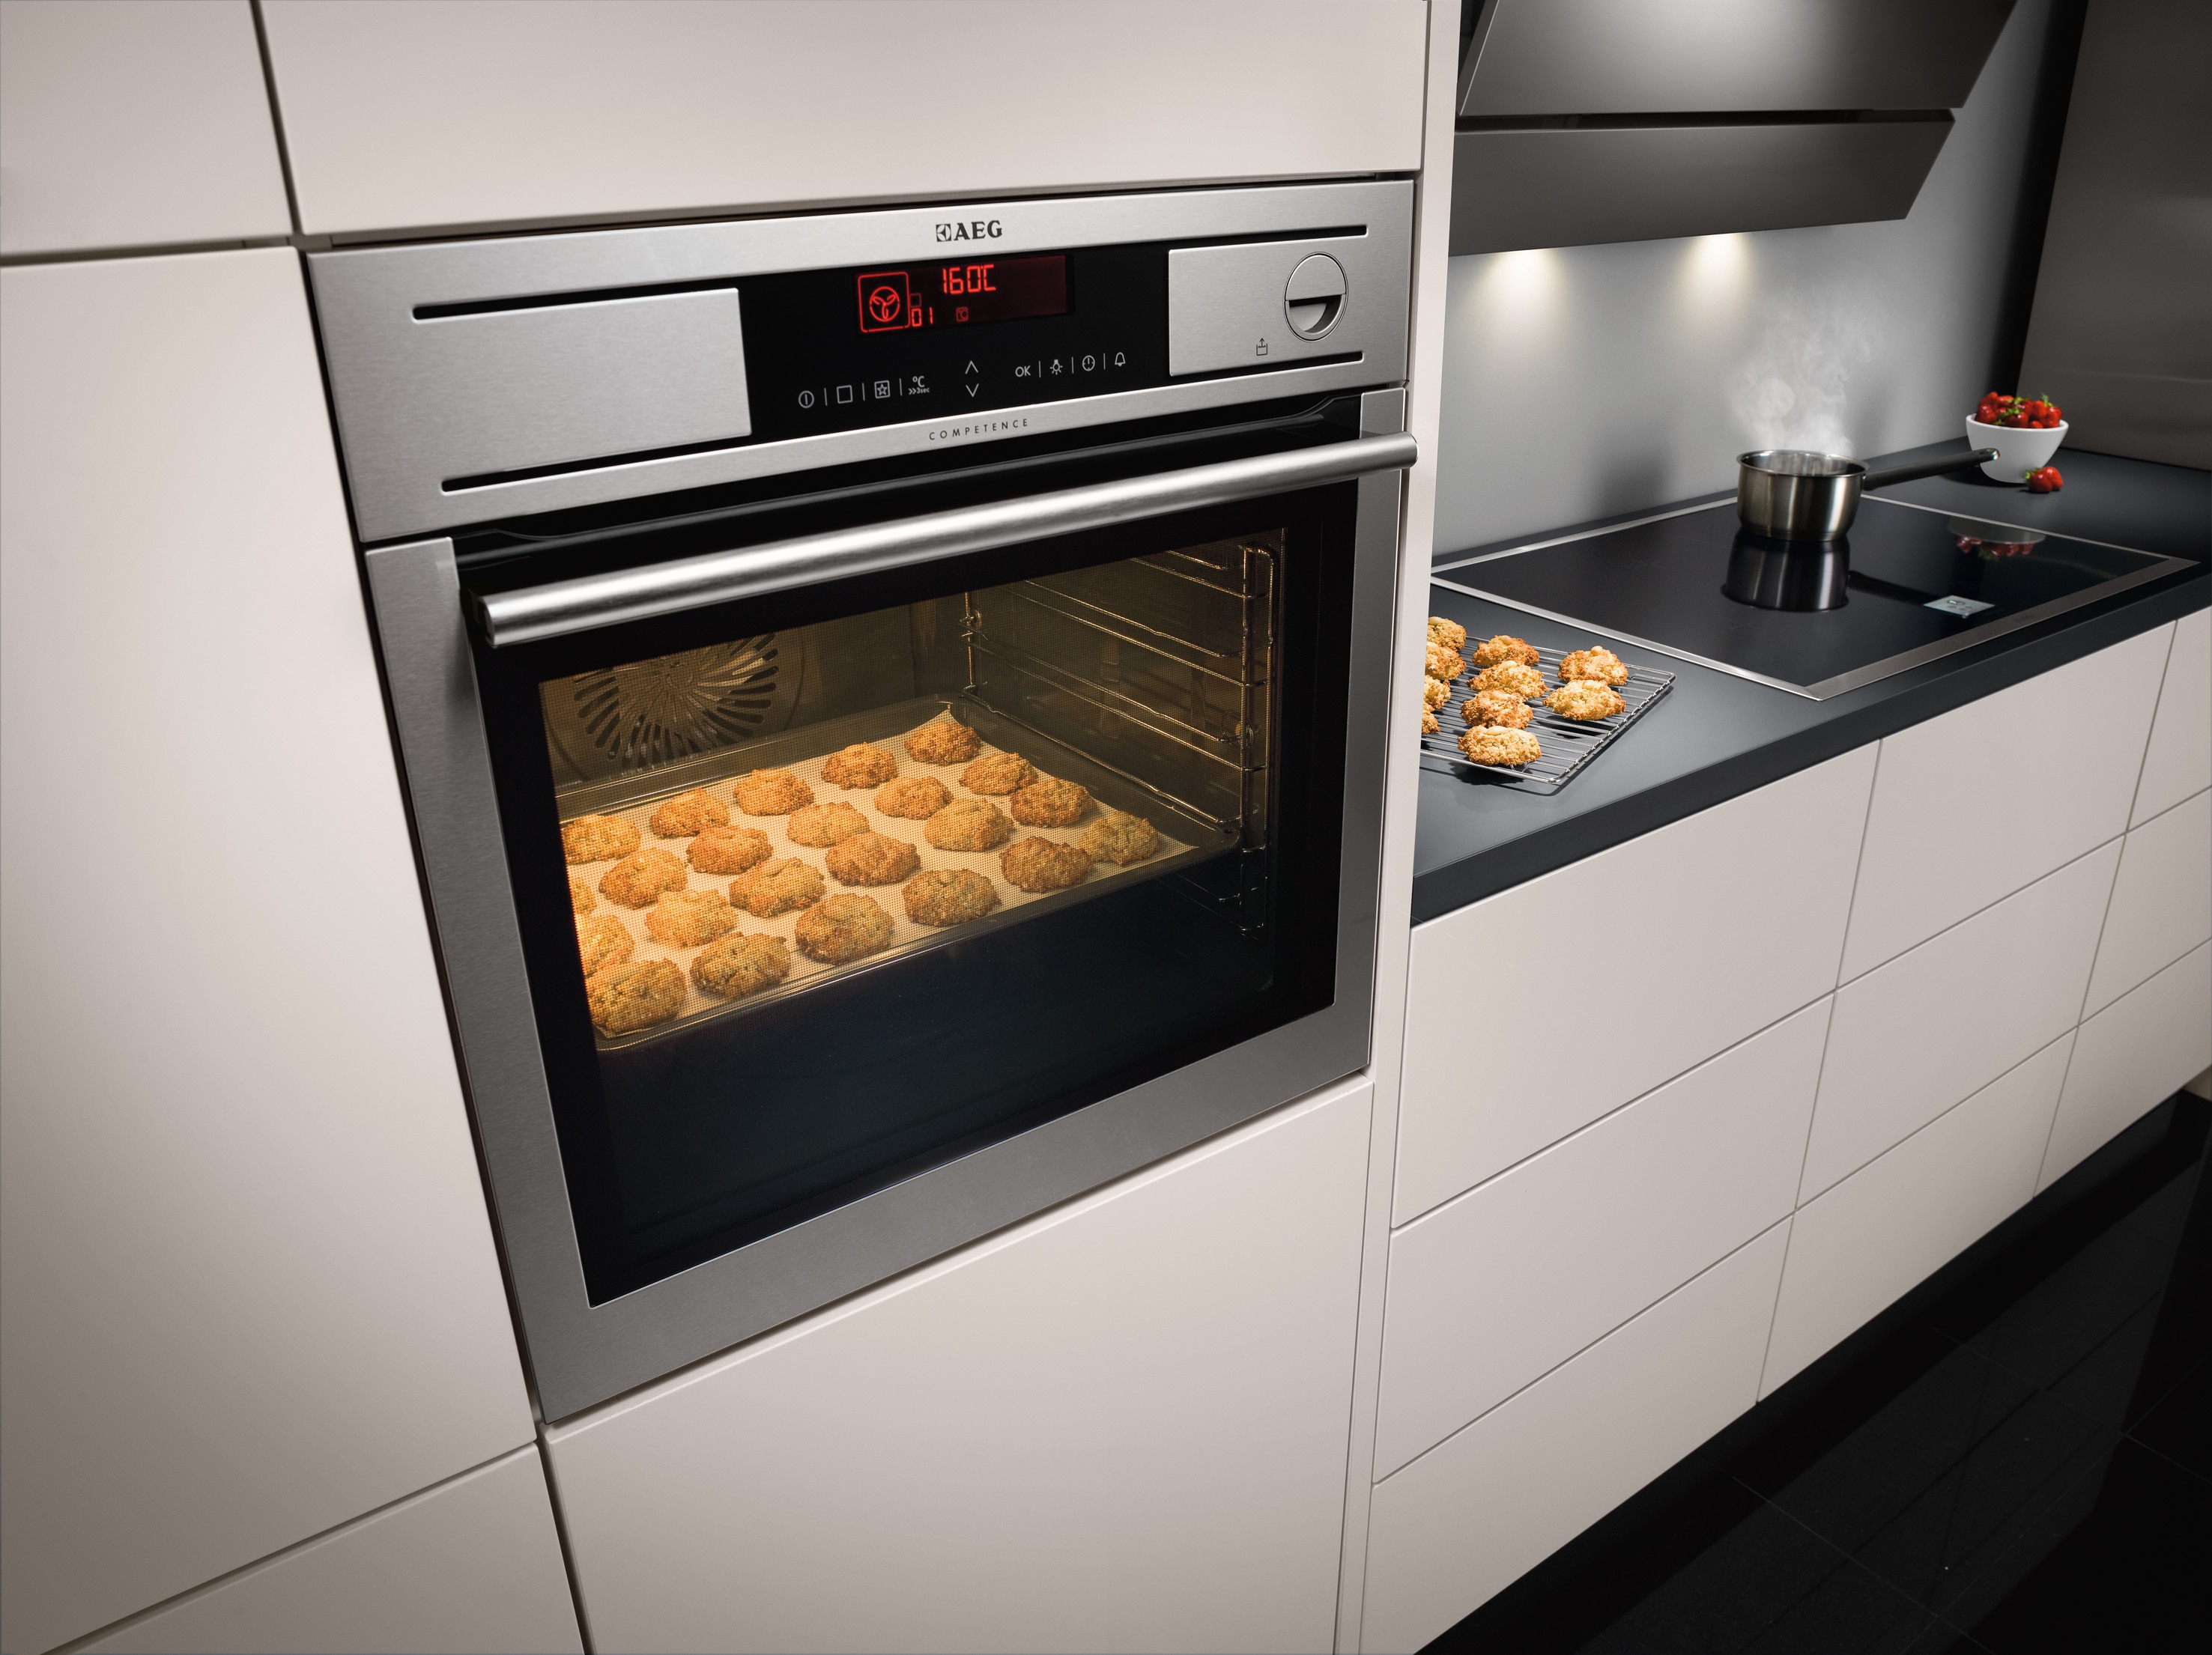 Dor Tirannie Plasticiteit iF and red dot design awards for Neue Kollektion – Electrolux Group